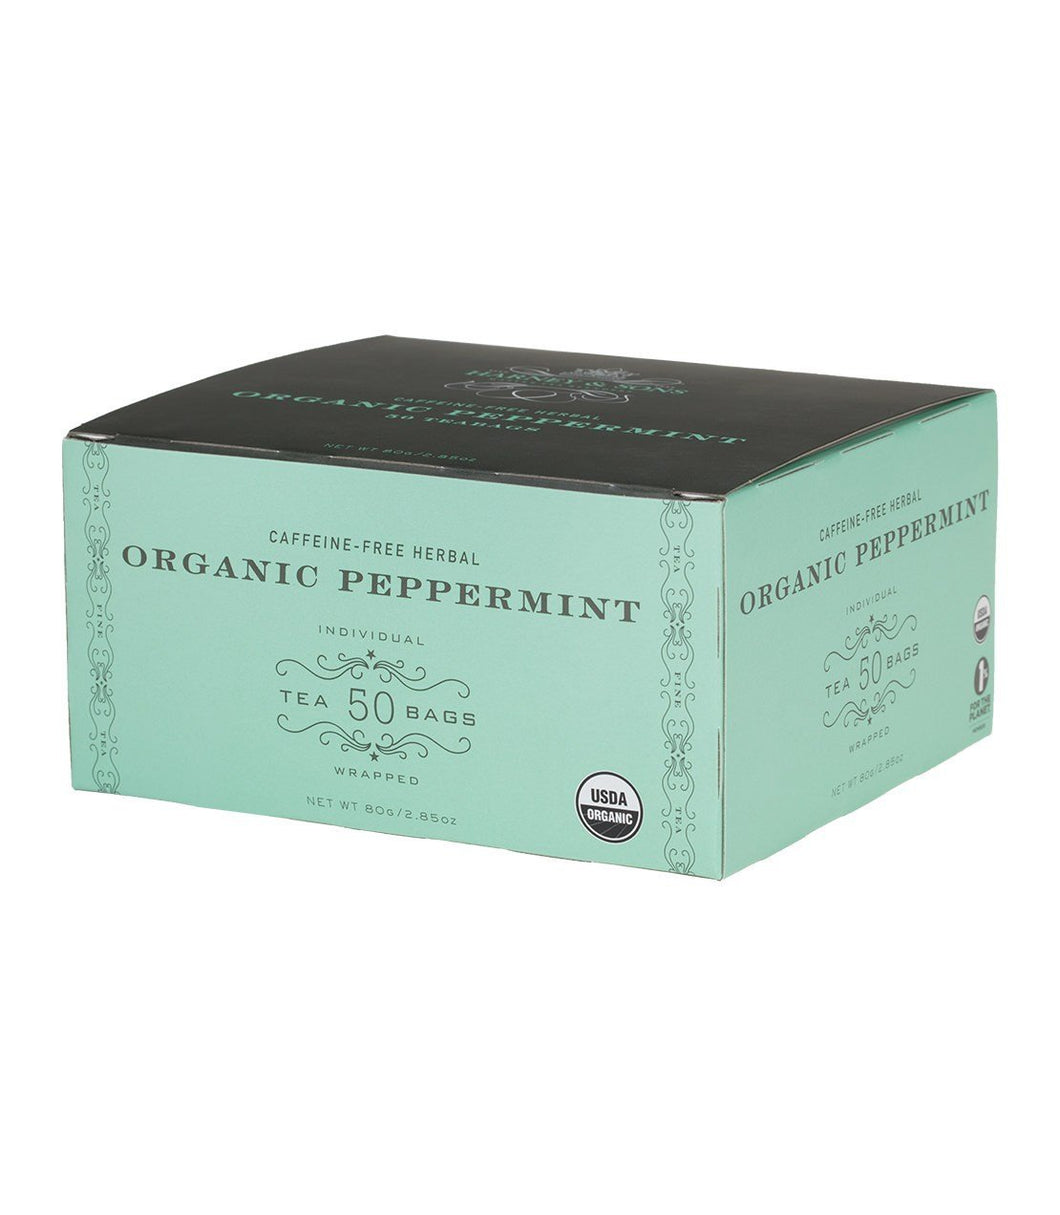 Harney & Sons - Organic Peppermint Herbal